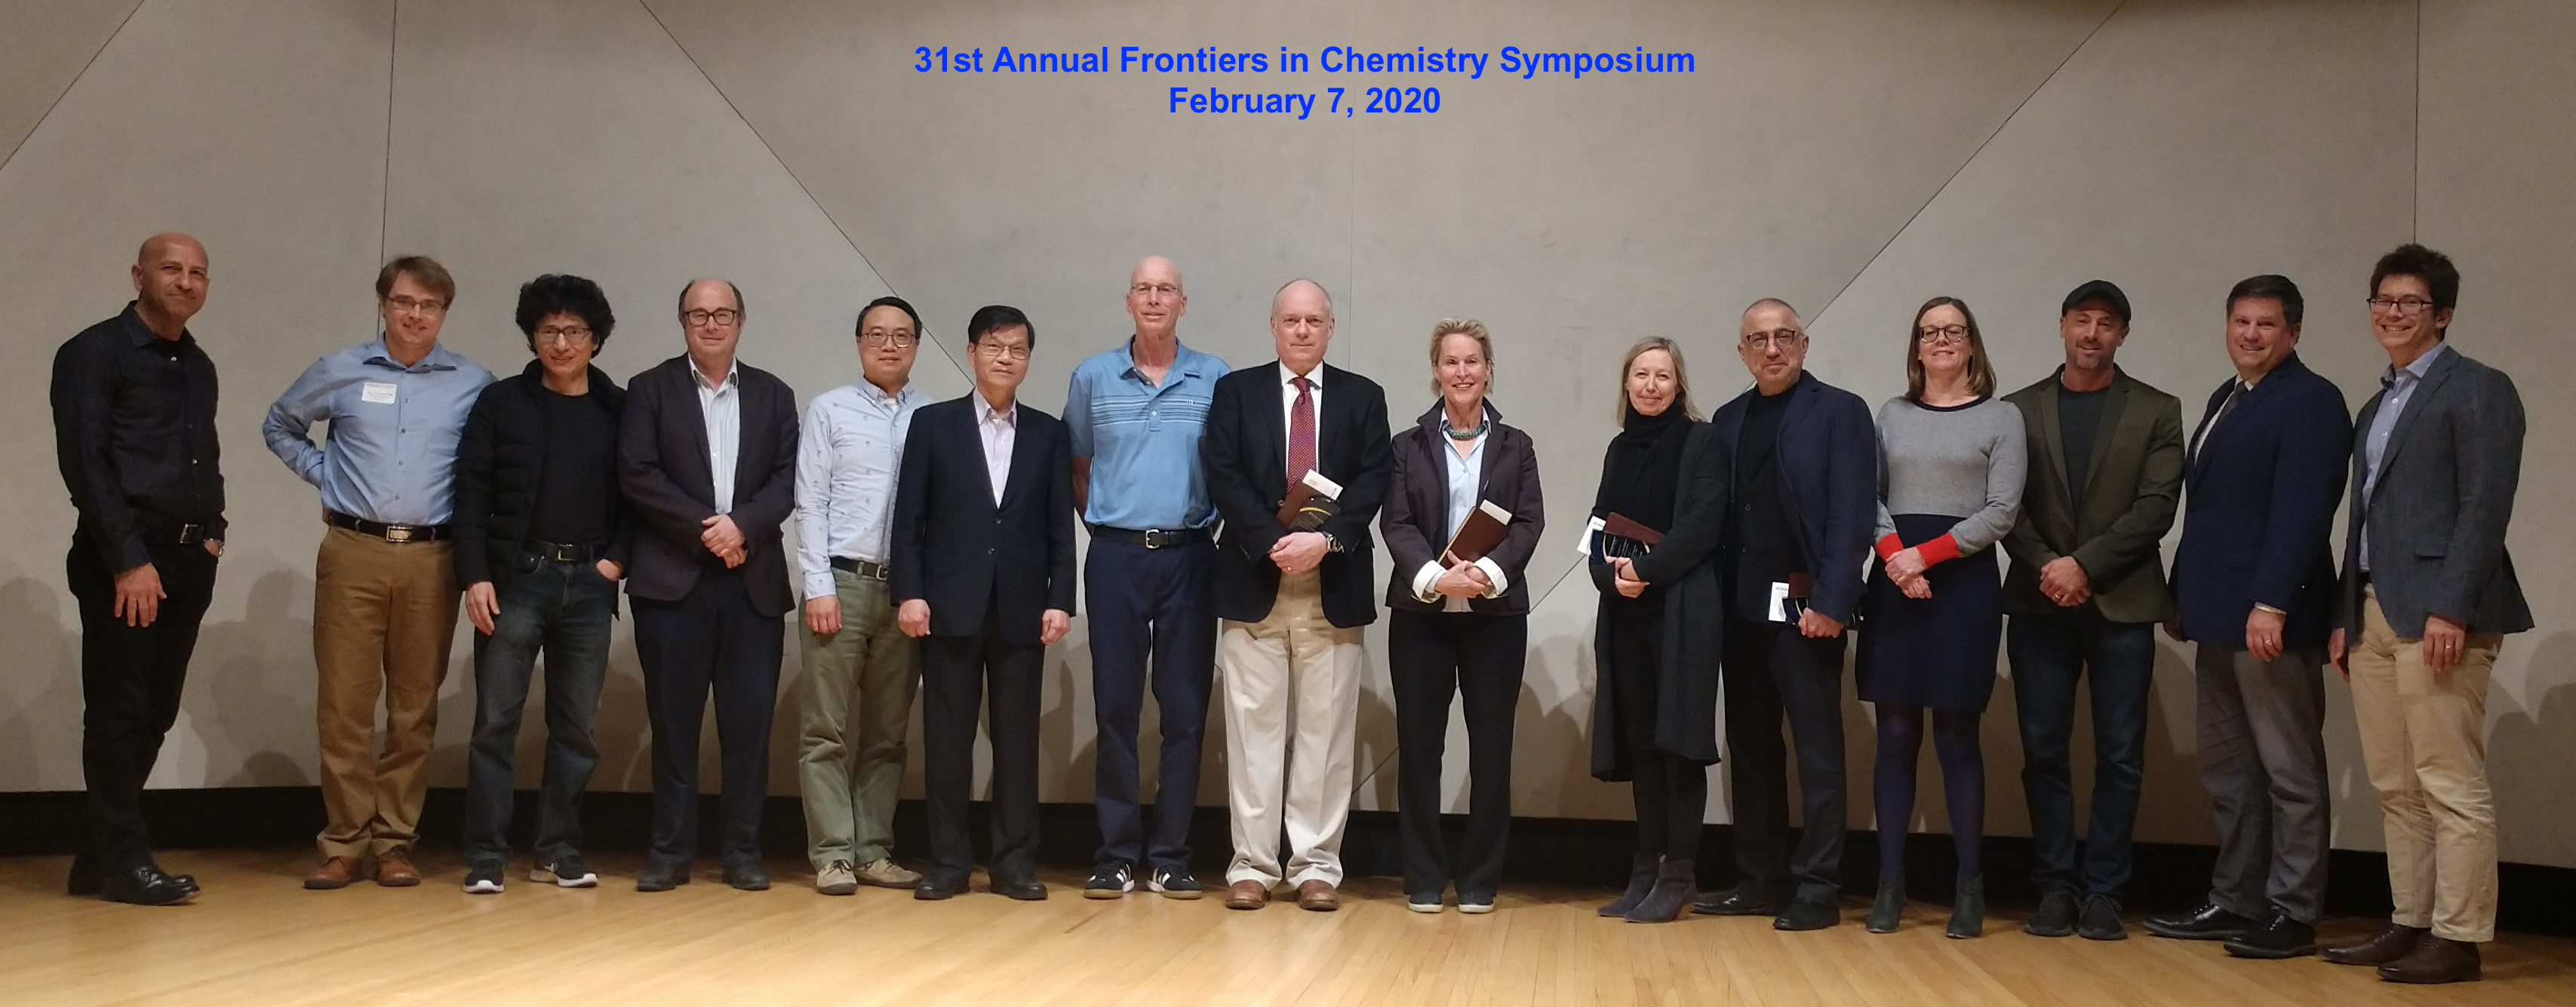 32nd Annual Frontiers in Chemistry Symposium